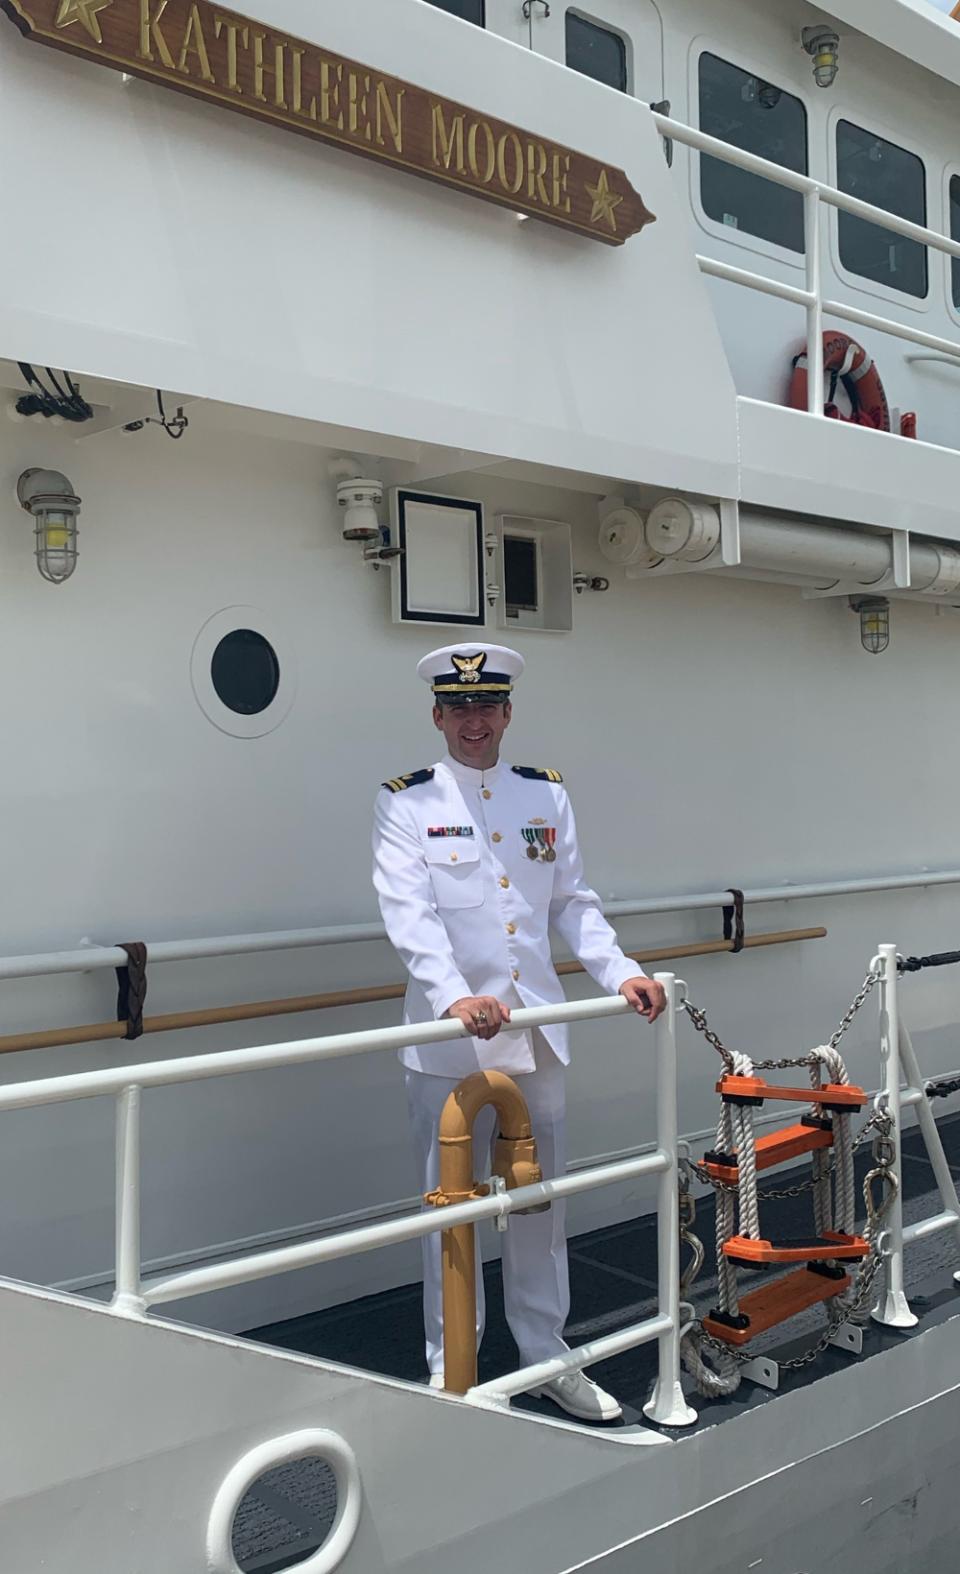 Andy Collins wearing a US Coast Guard uniform, standing on a shipdeck